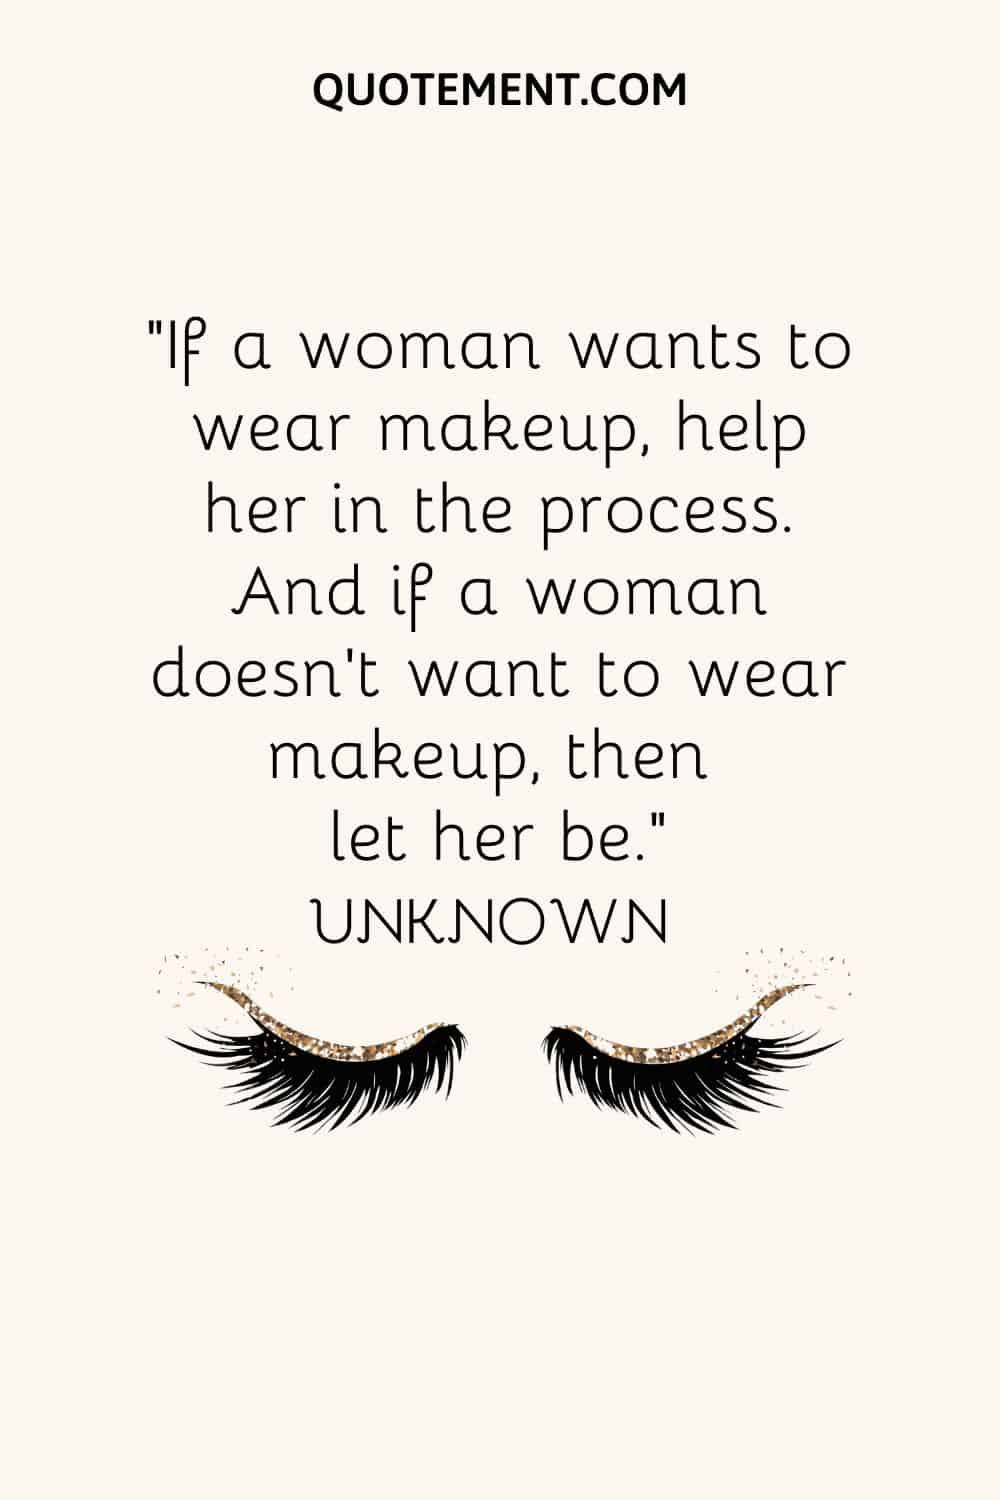 If a woman wants to wear makeup, help her in the process